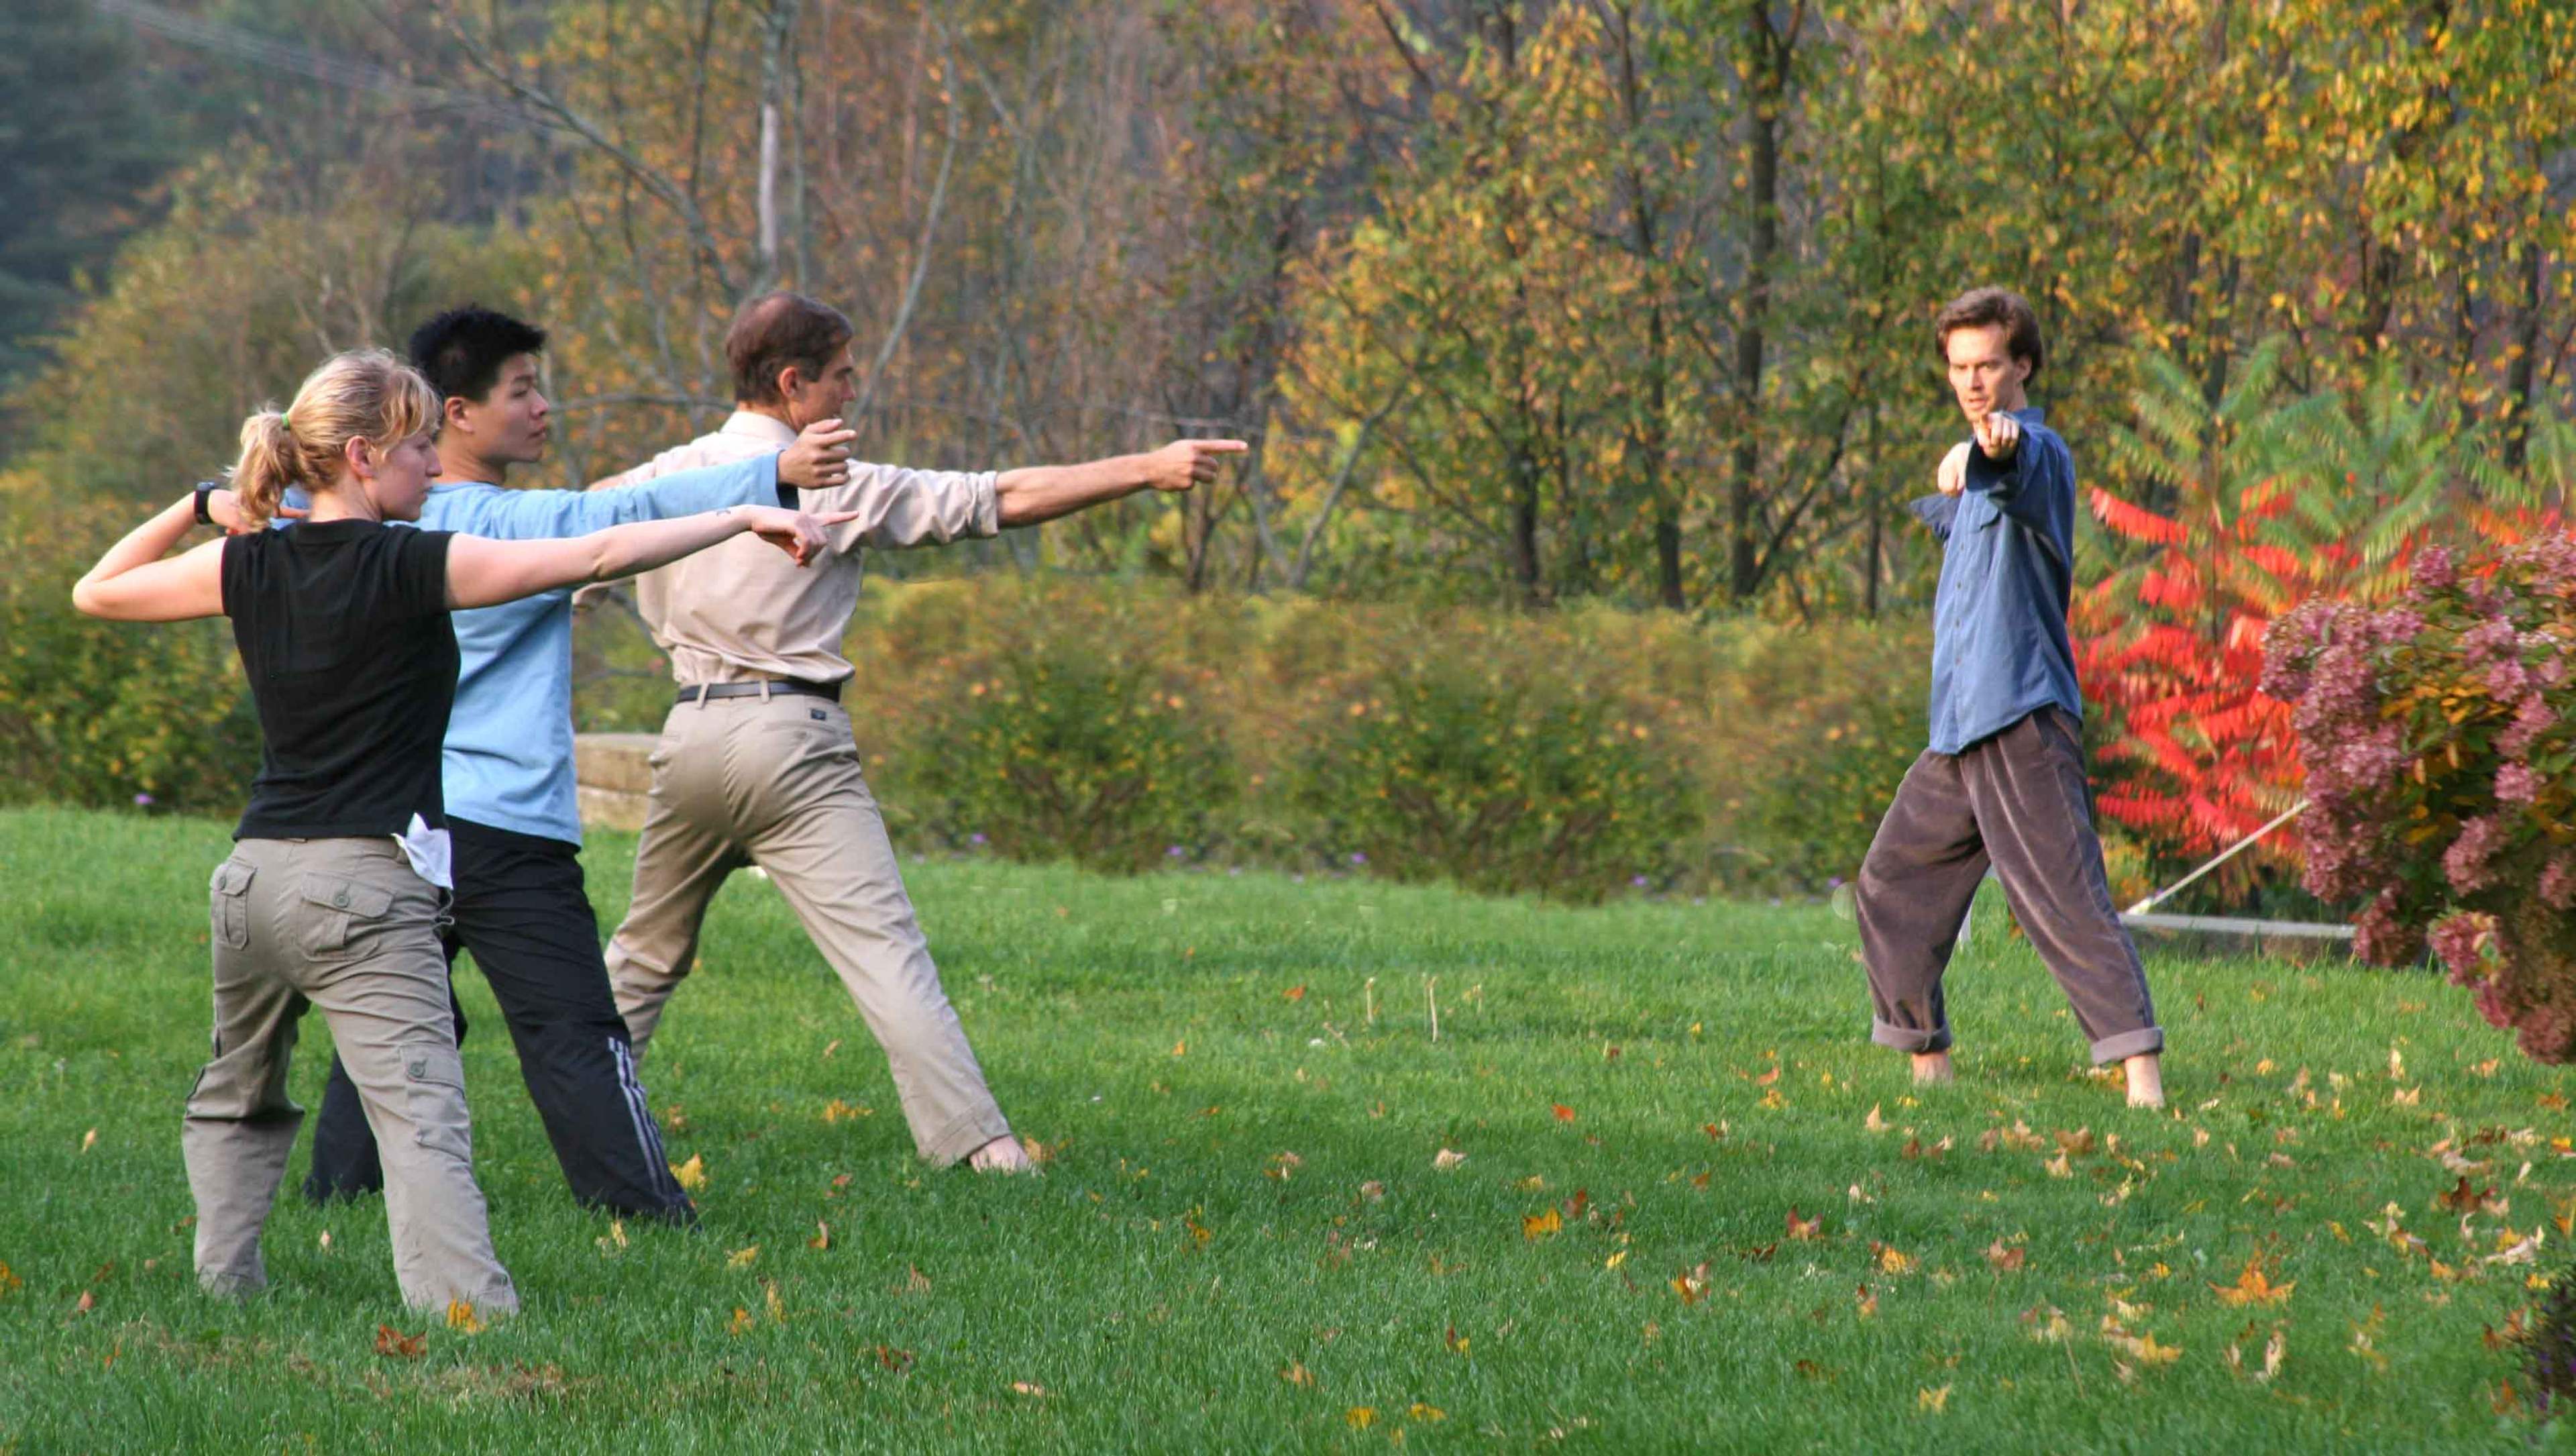 Contemplative disciplines and practices include qigong, kyudo, tai chi, yoga and more!